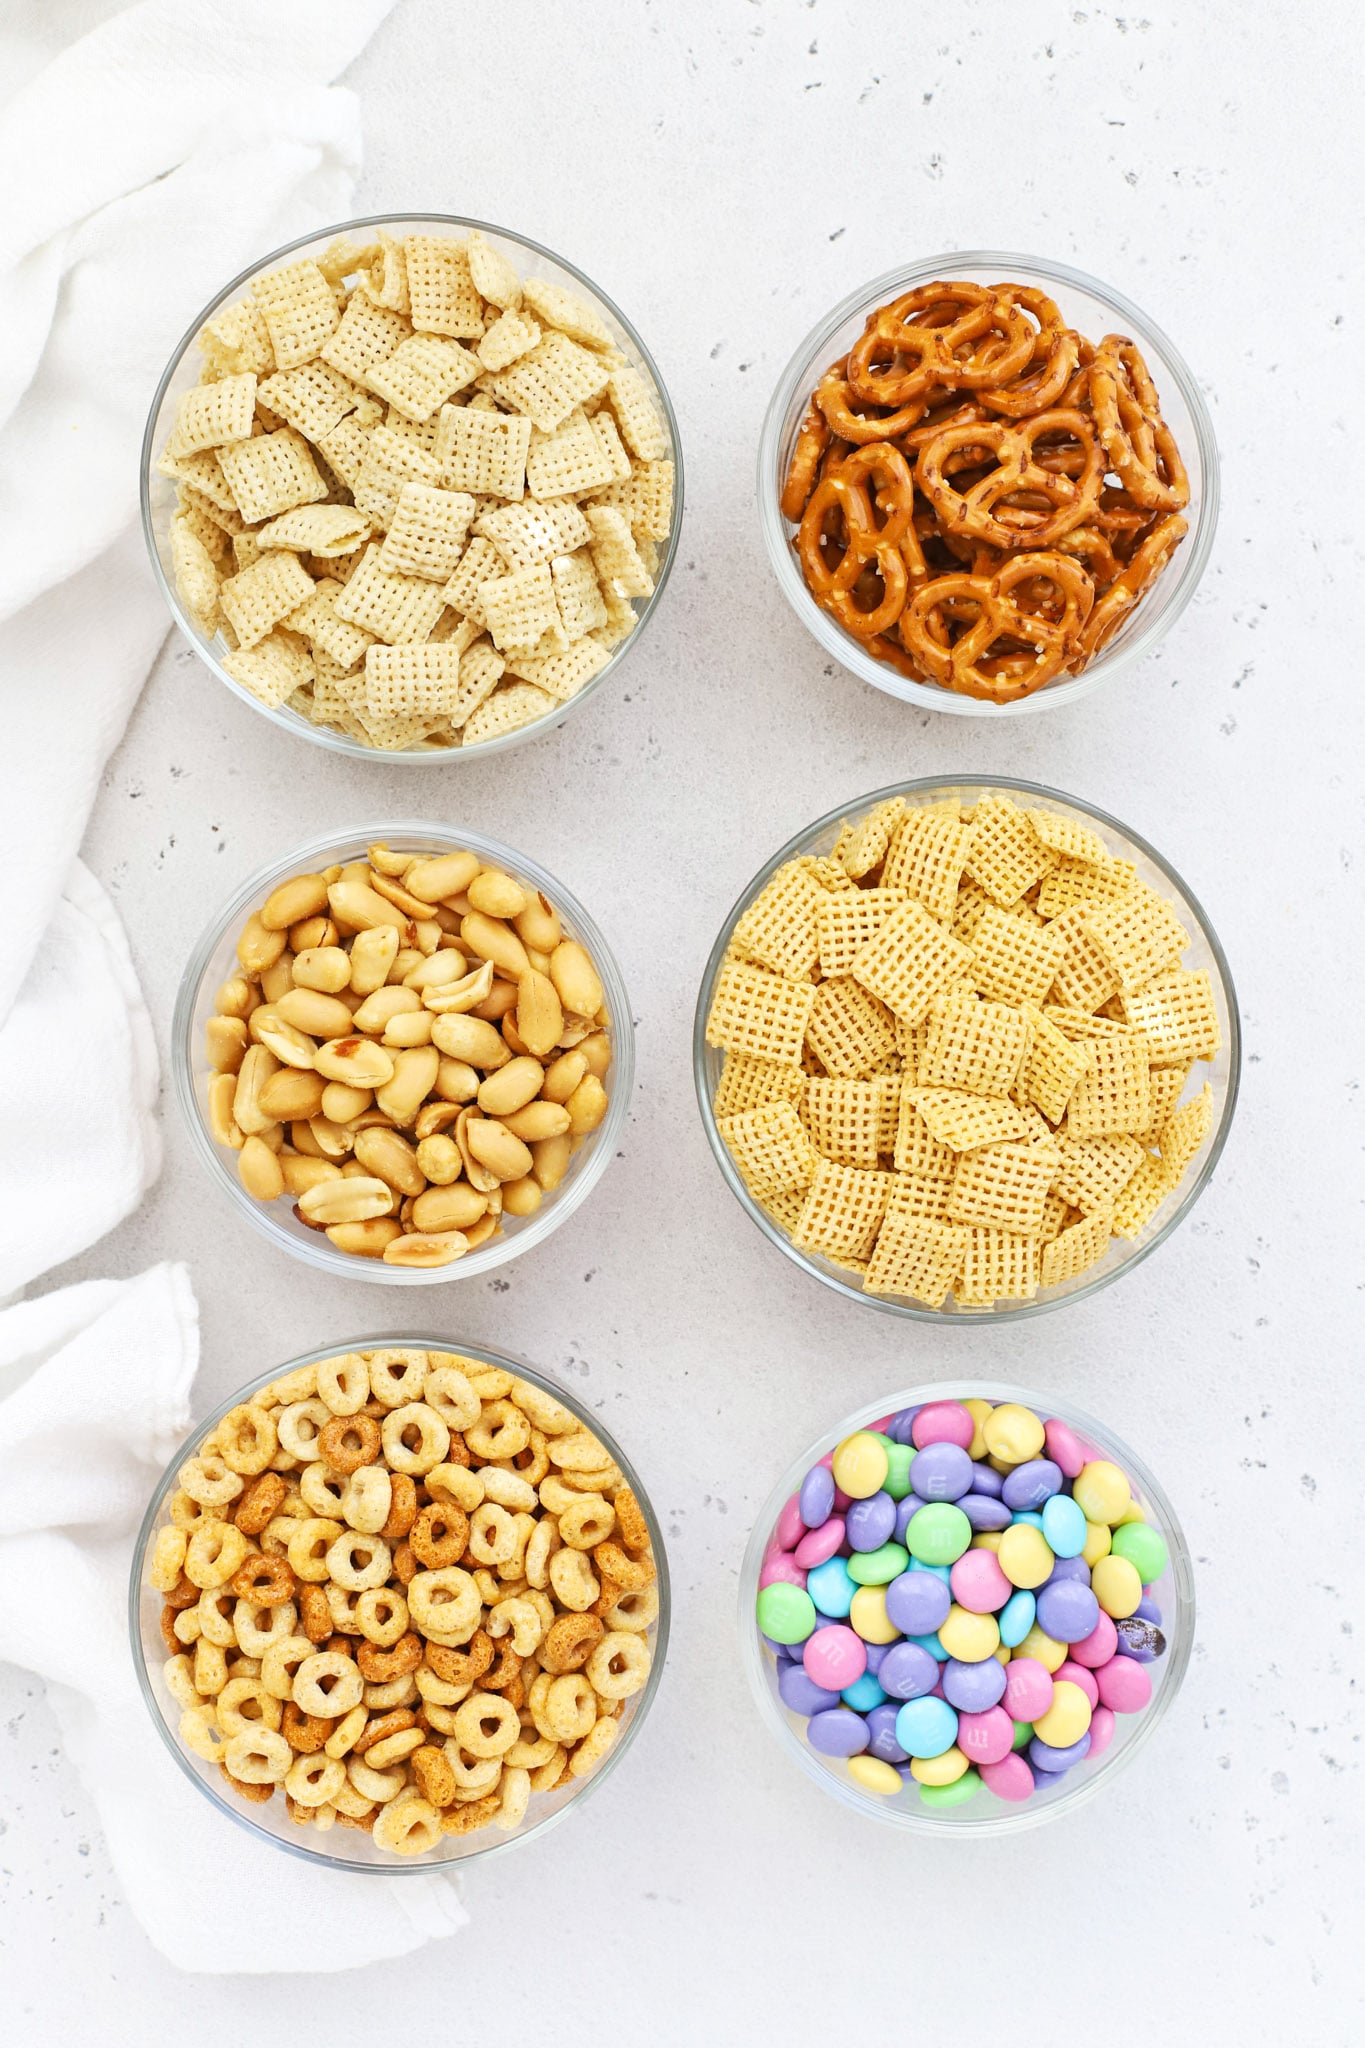 Ingredients for gluten-free bunny bait chex mix